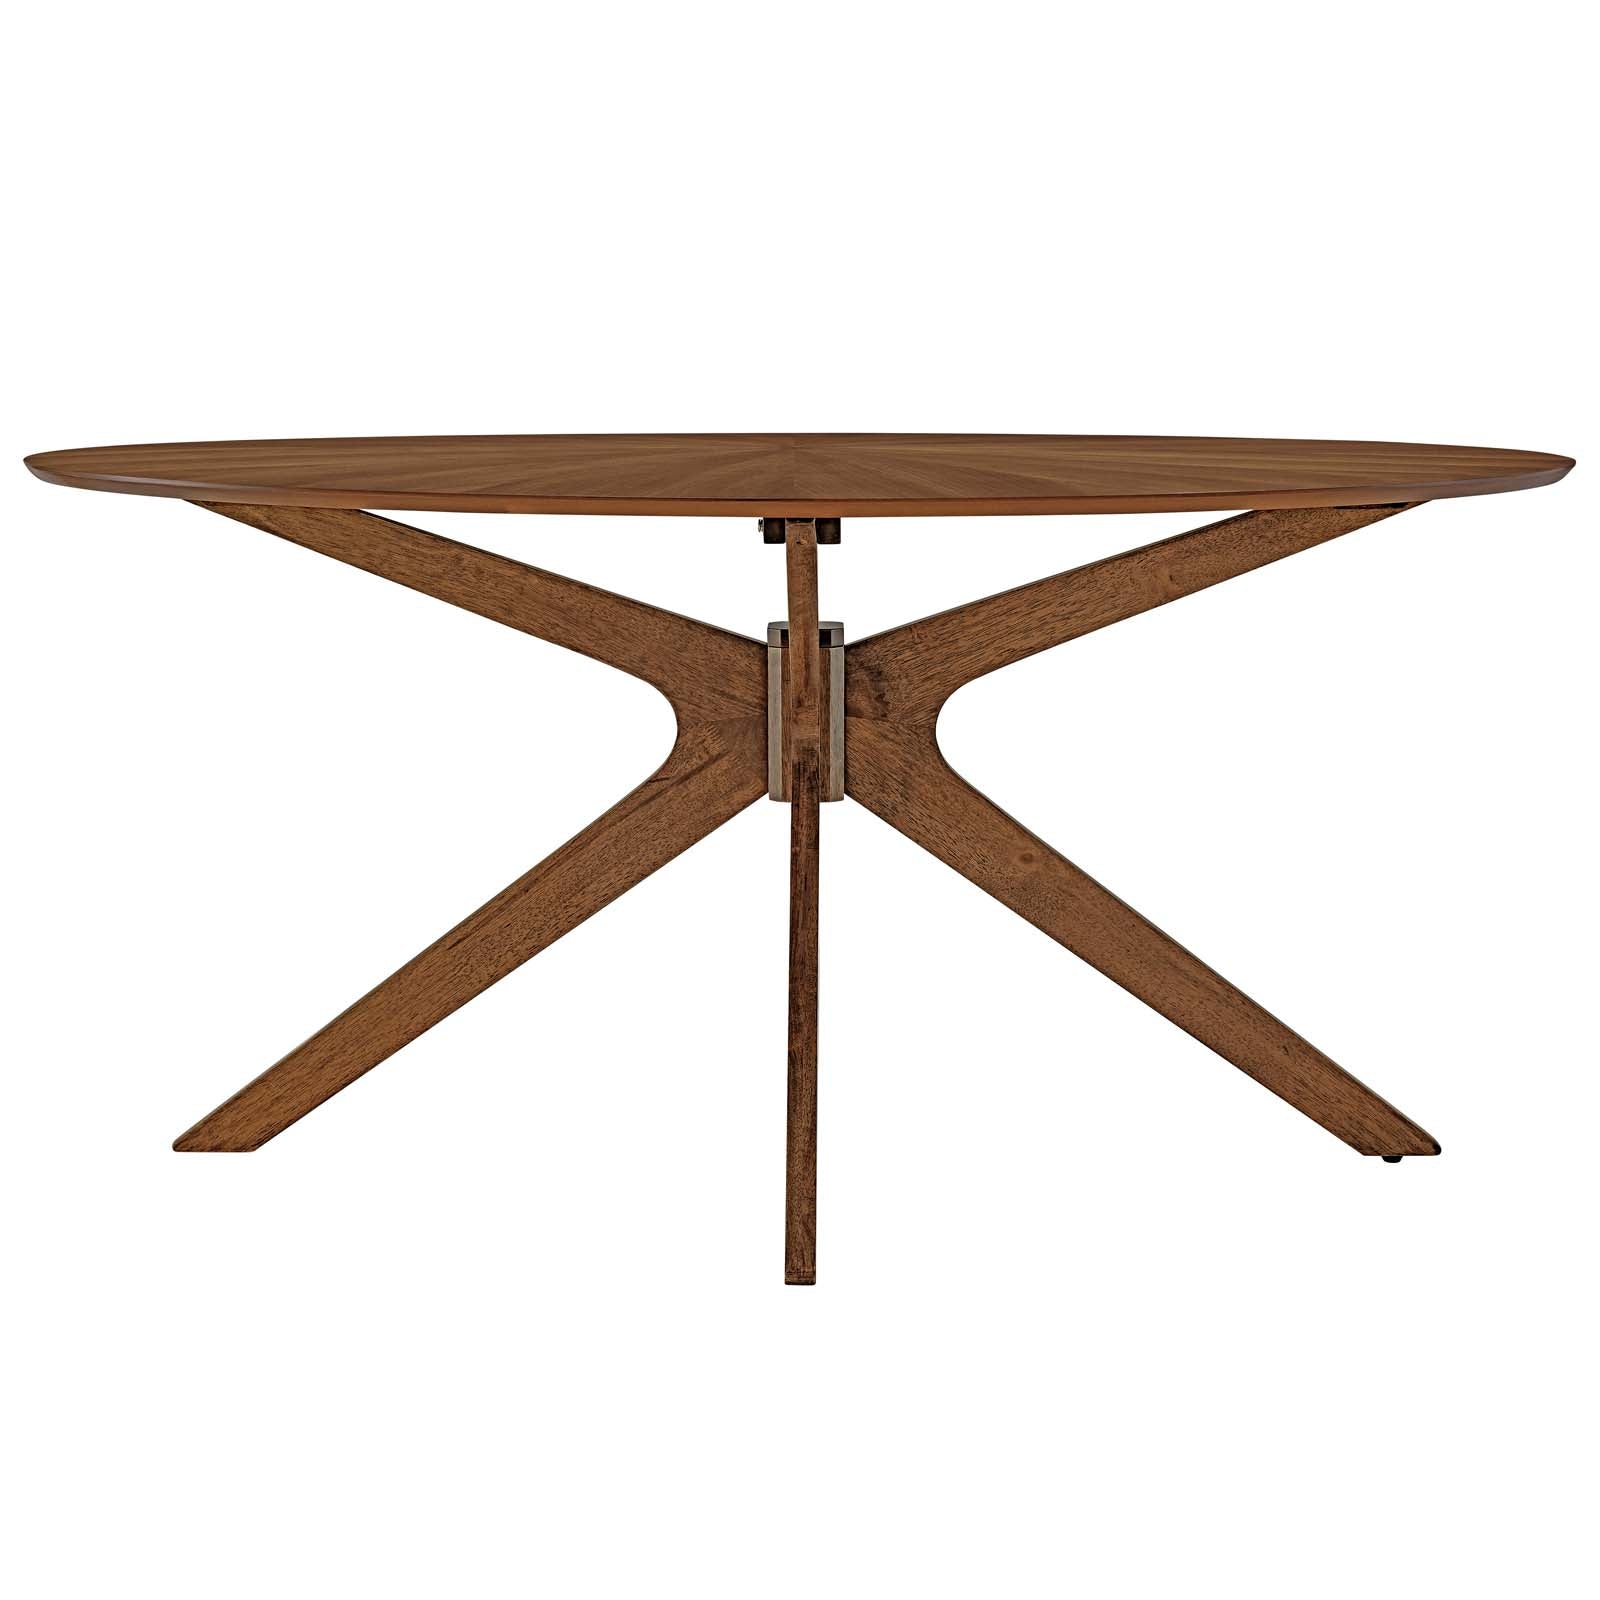 Crossroads 63" Oval Wood Dining Table - East Shore Modern Home Furnishings